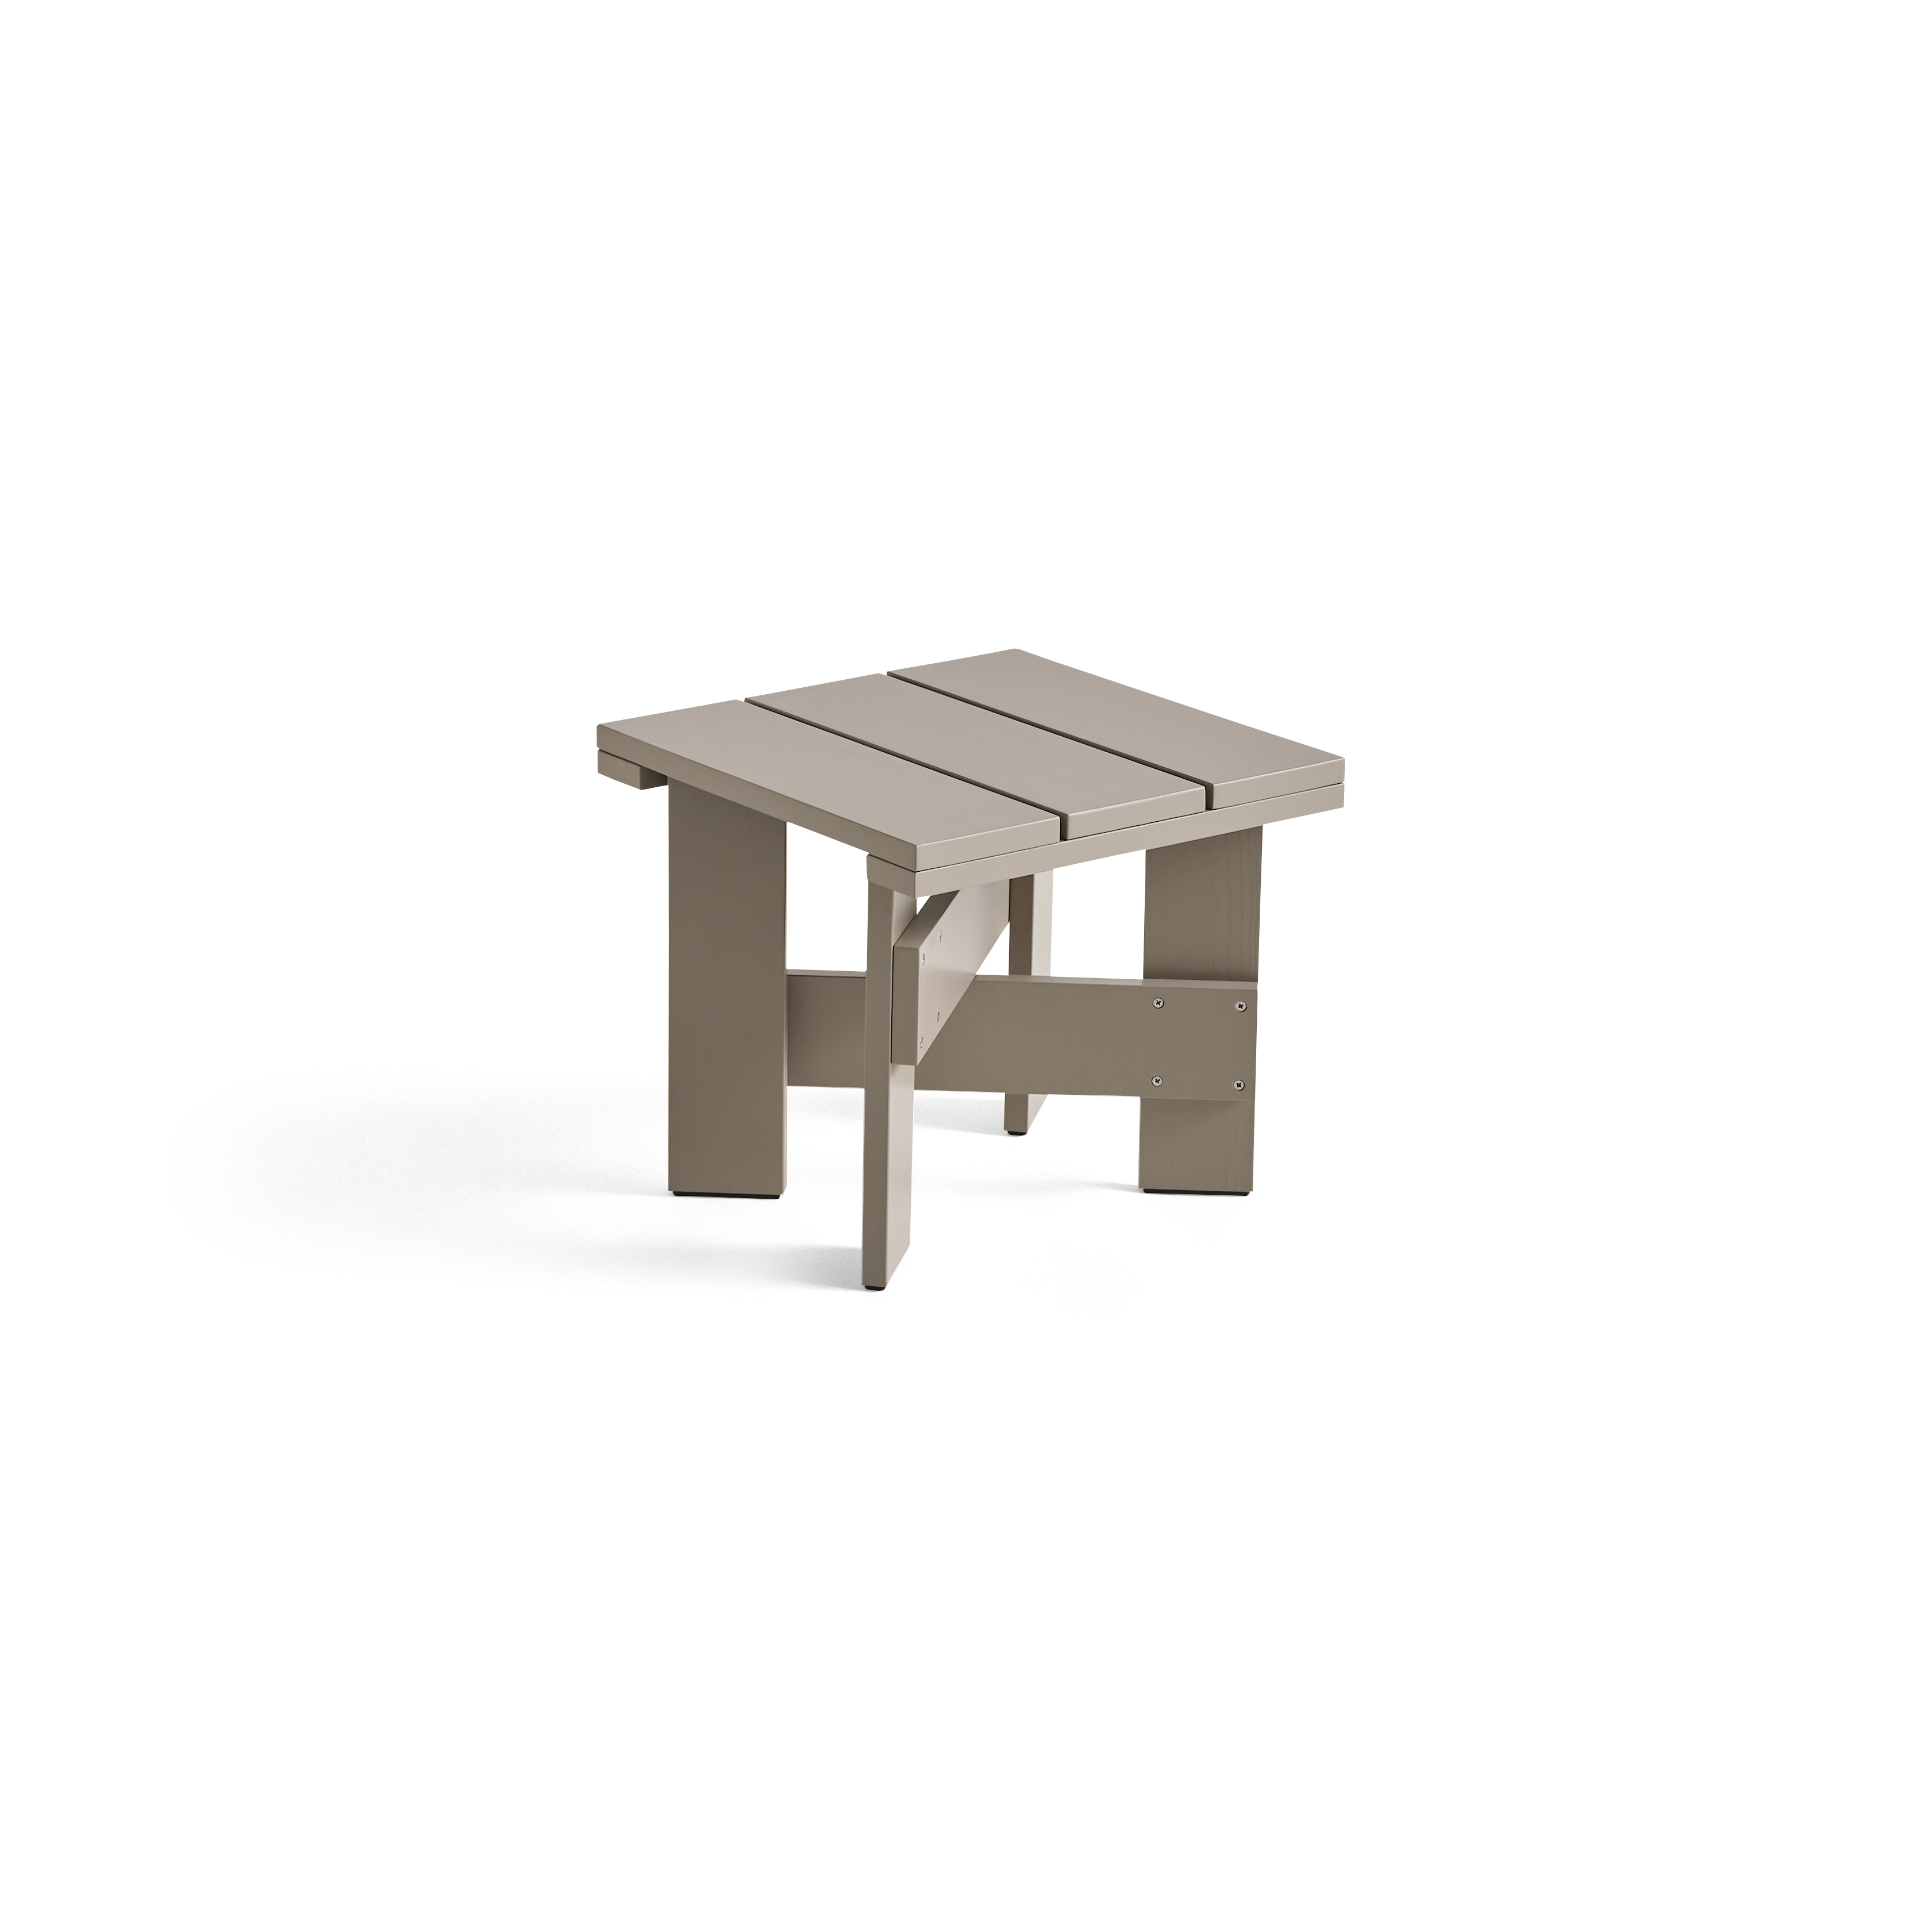 Crate low table - London Fog waterbased lacq pinewood